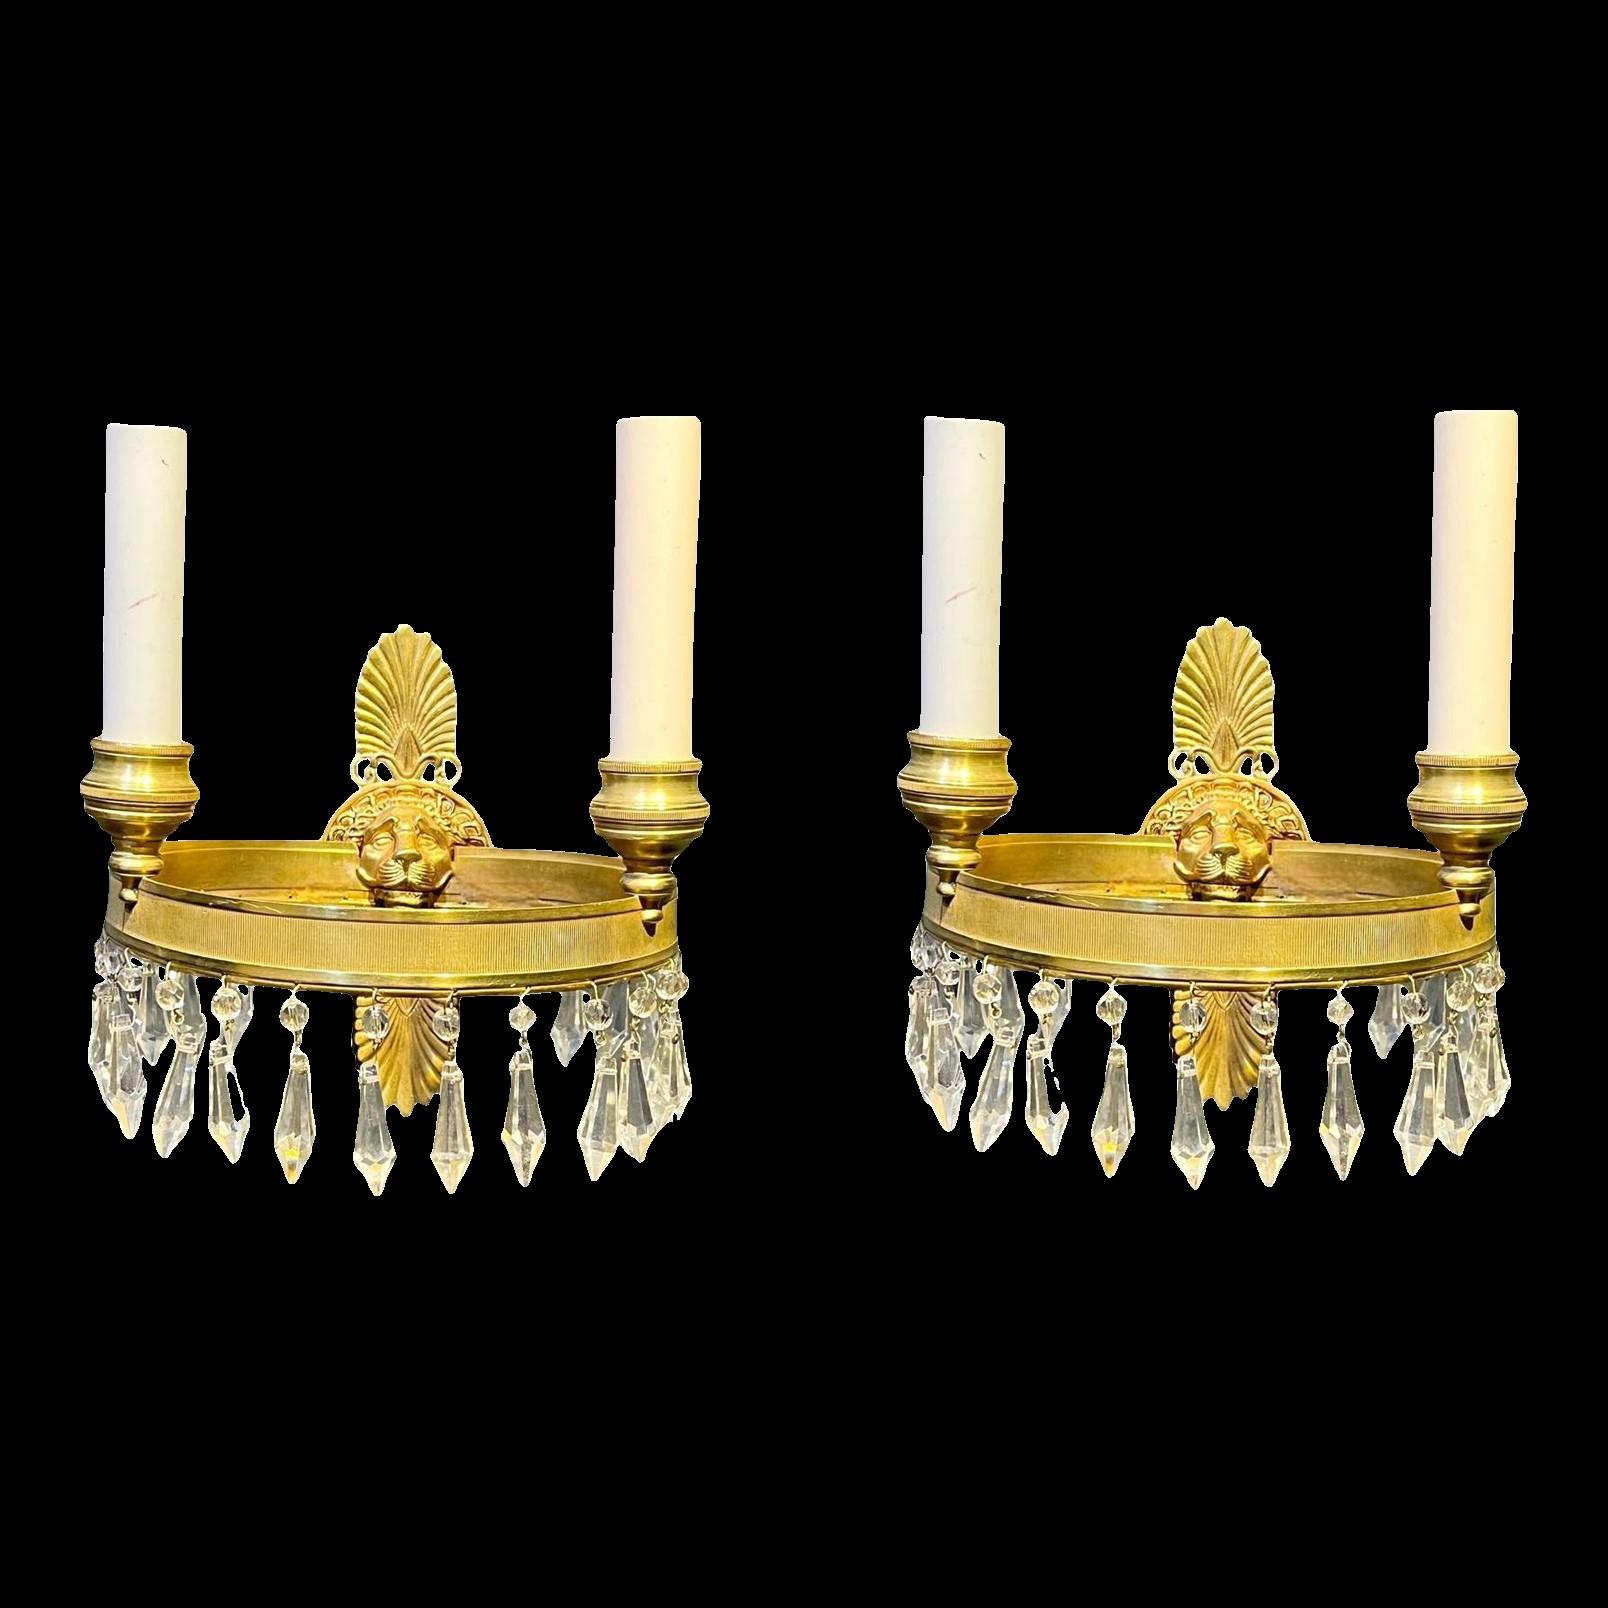 A pair of circa 1930's French gilt bronze sconces with lion's head and crystal hangings